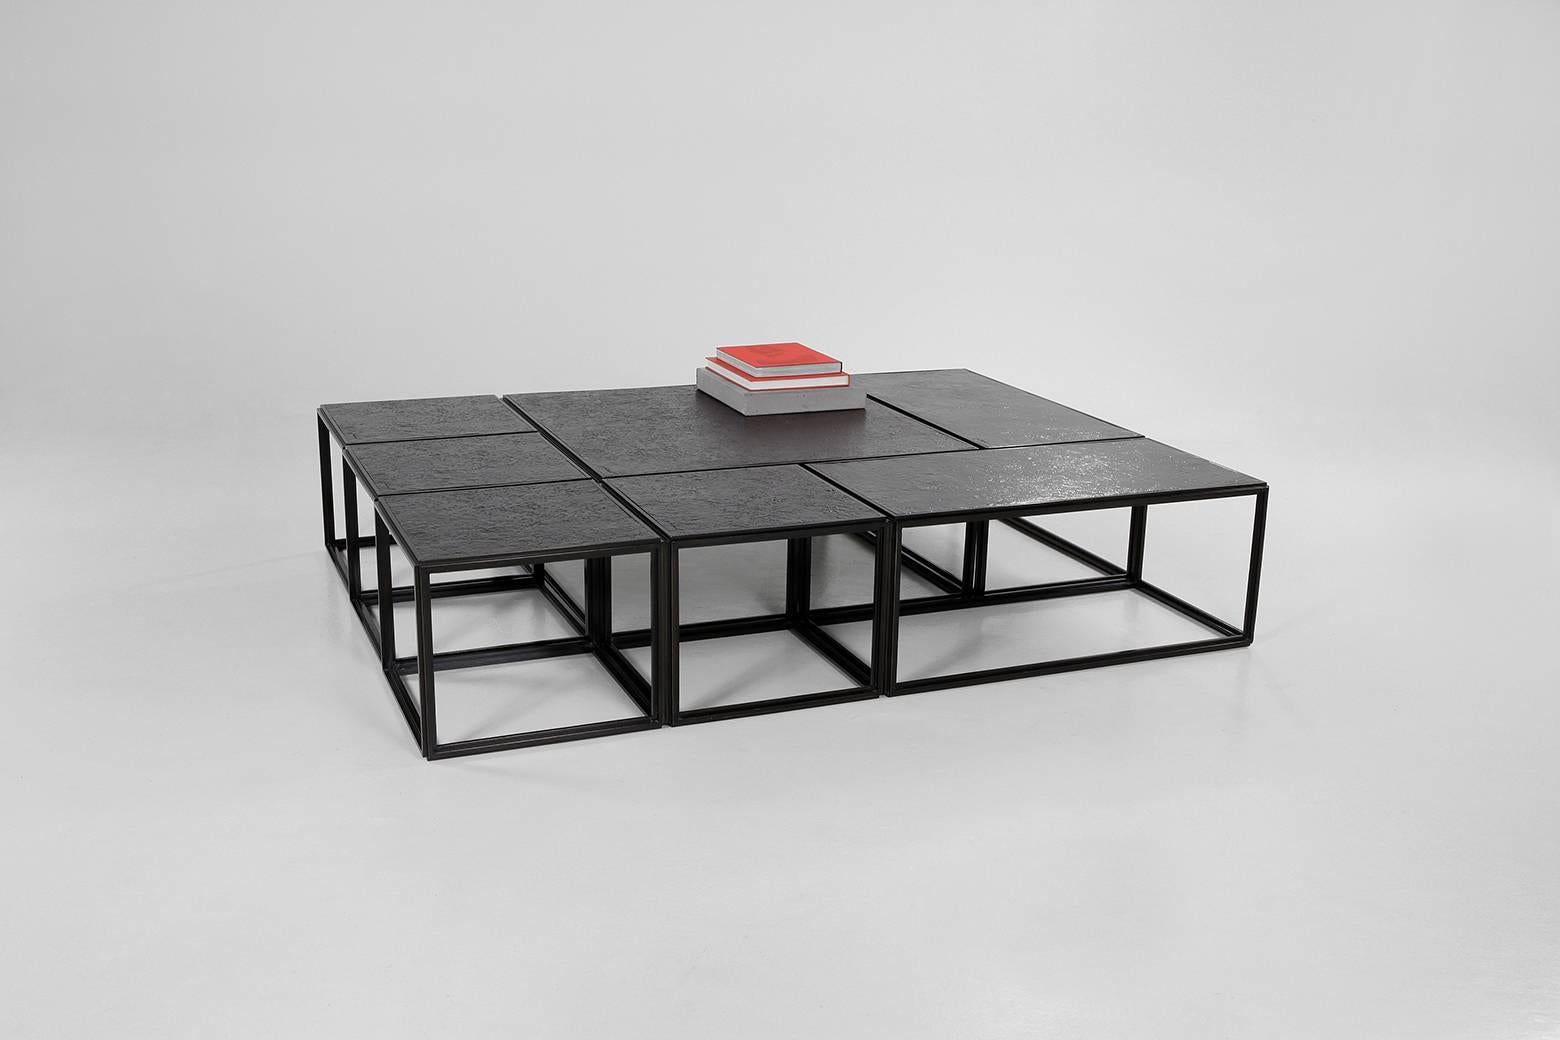 Thai Grand Bronze and Brass Low Table, Modular Mondrian Style, by  P. Tendercool For Sale